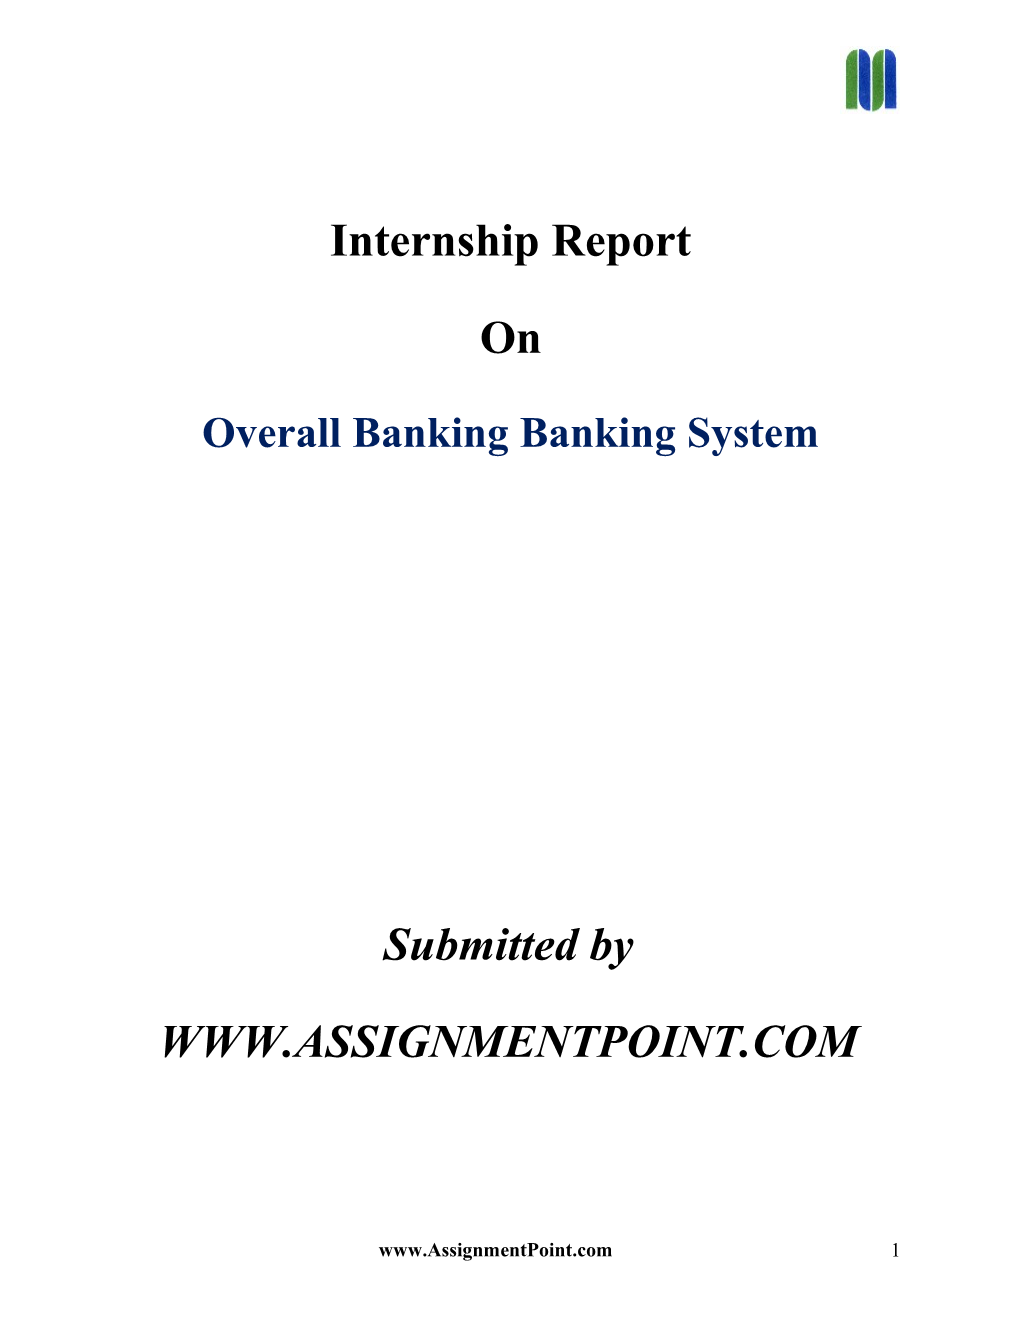 Overall Banking Banking System